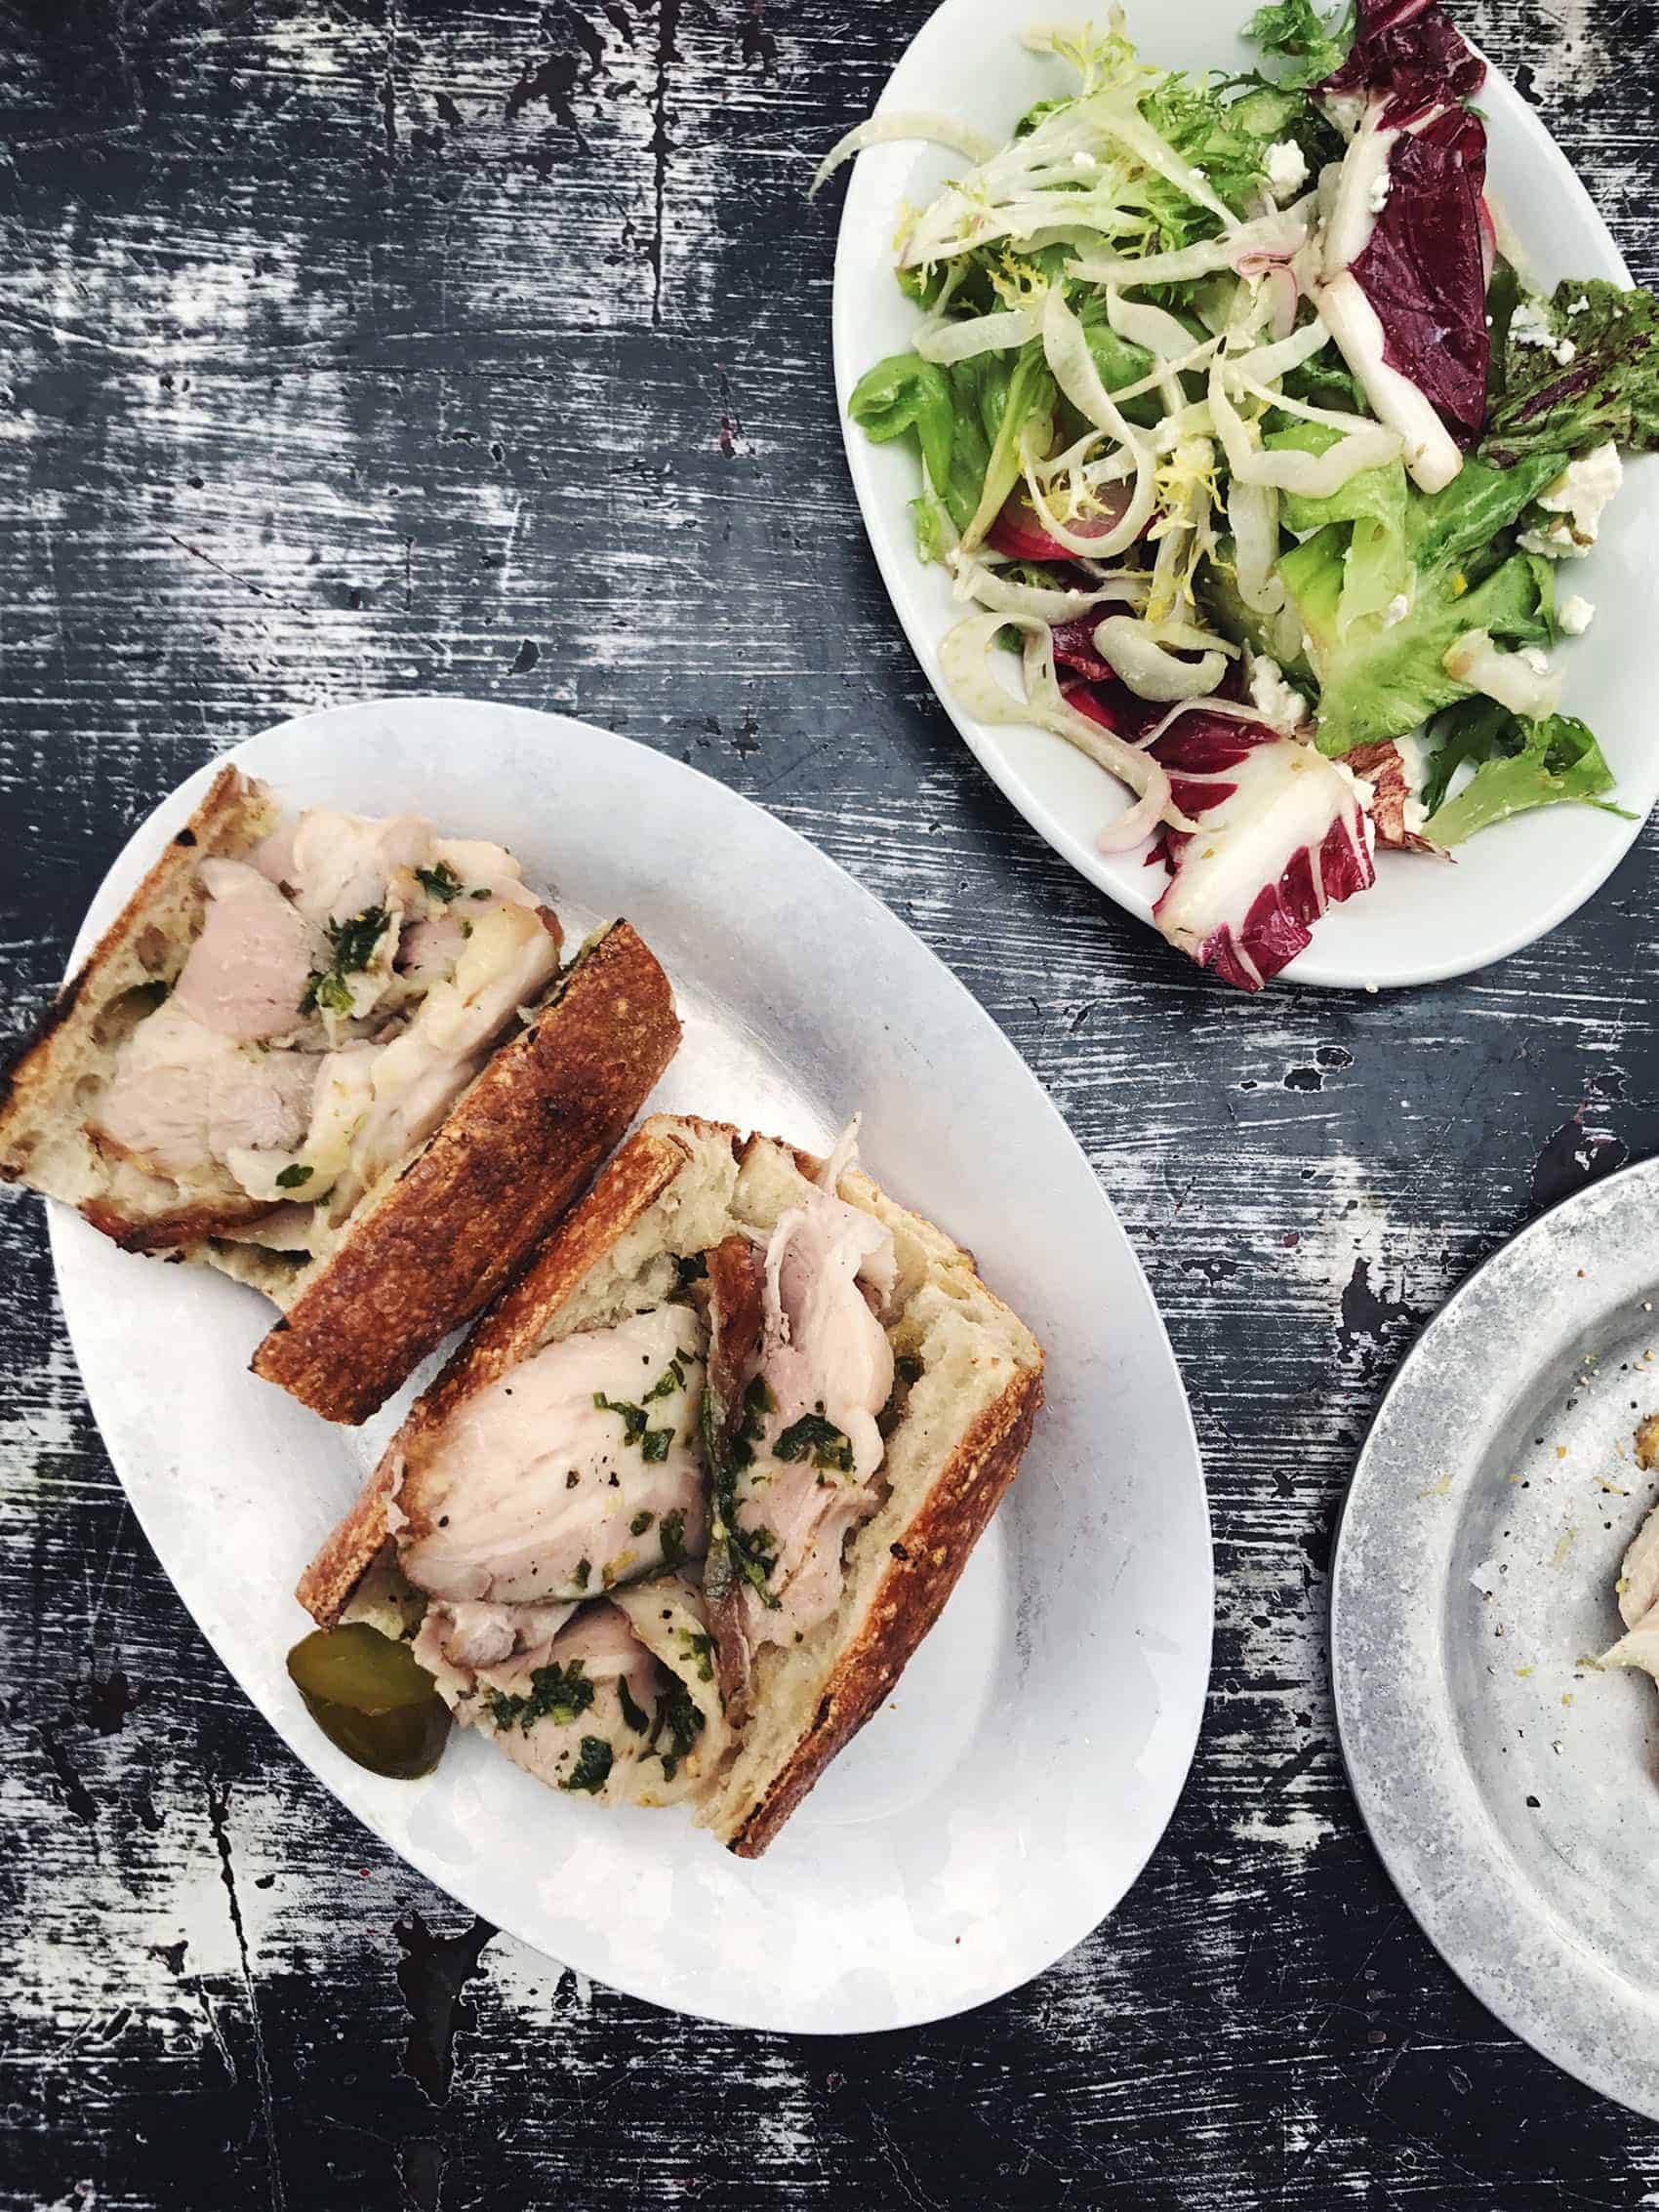 Lunch at Gjusta in Los Angeles | Porchetta sandwich with a side salad 